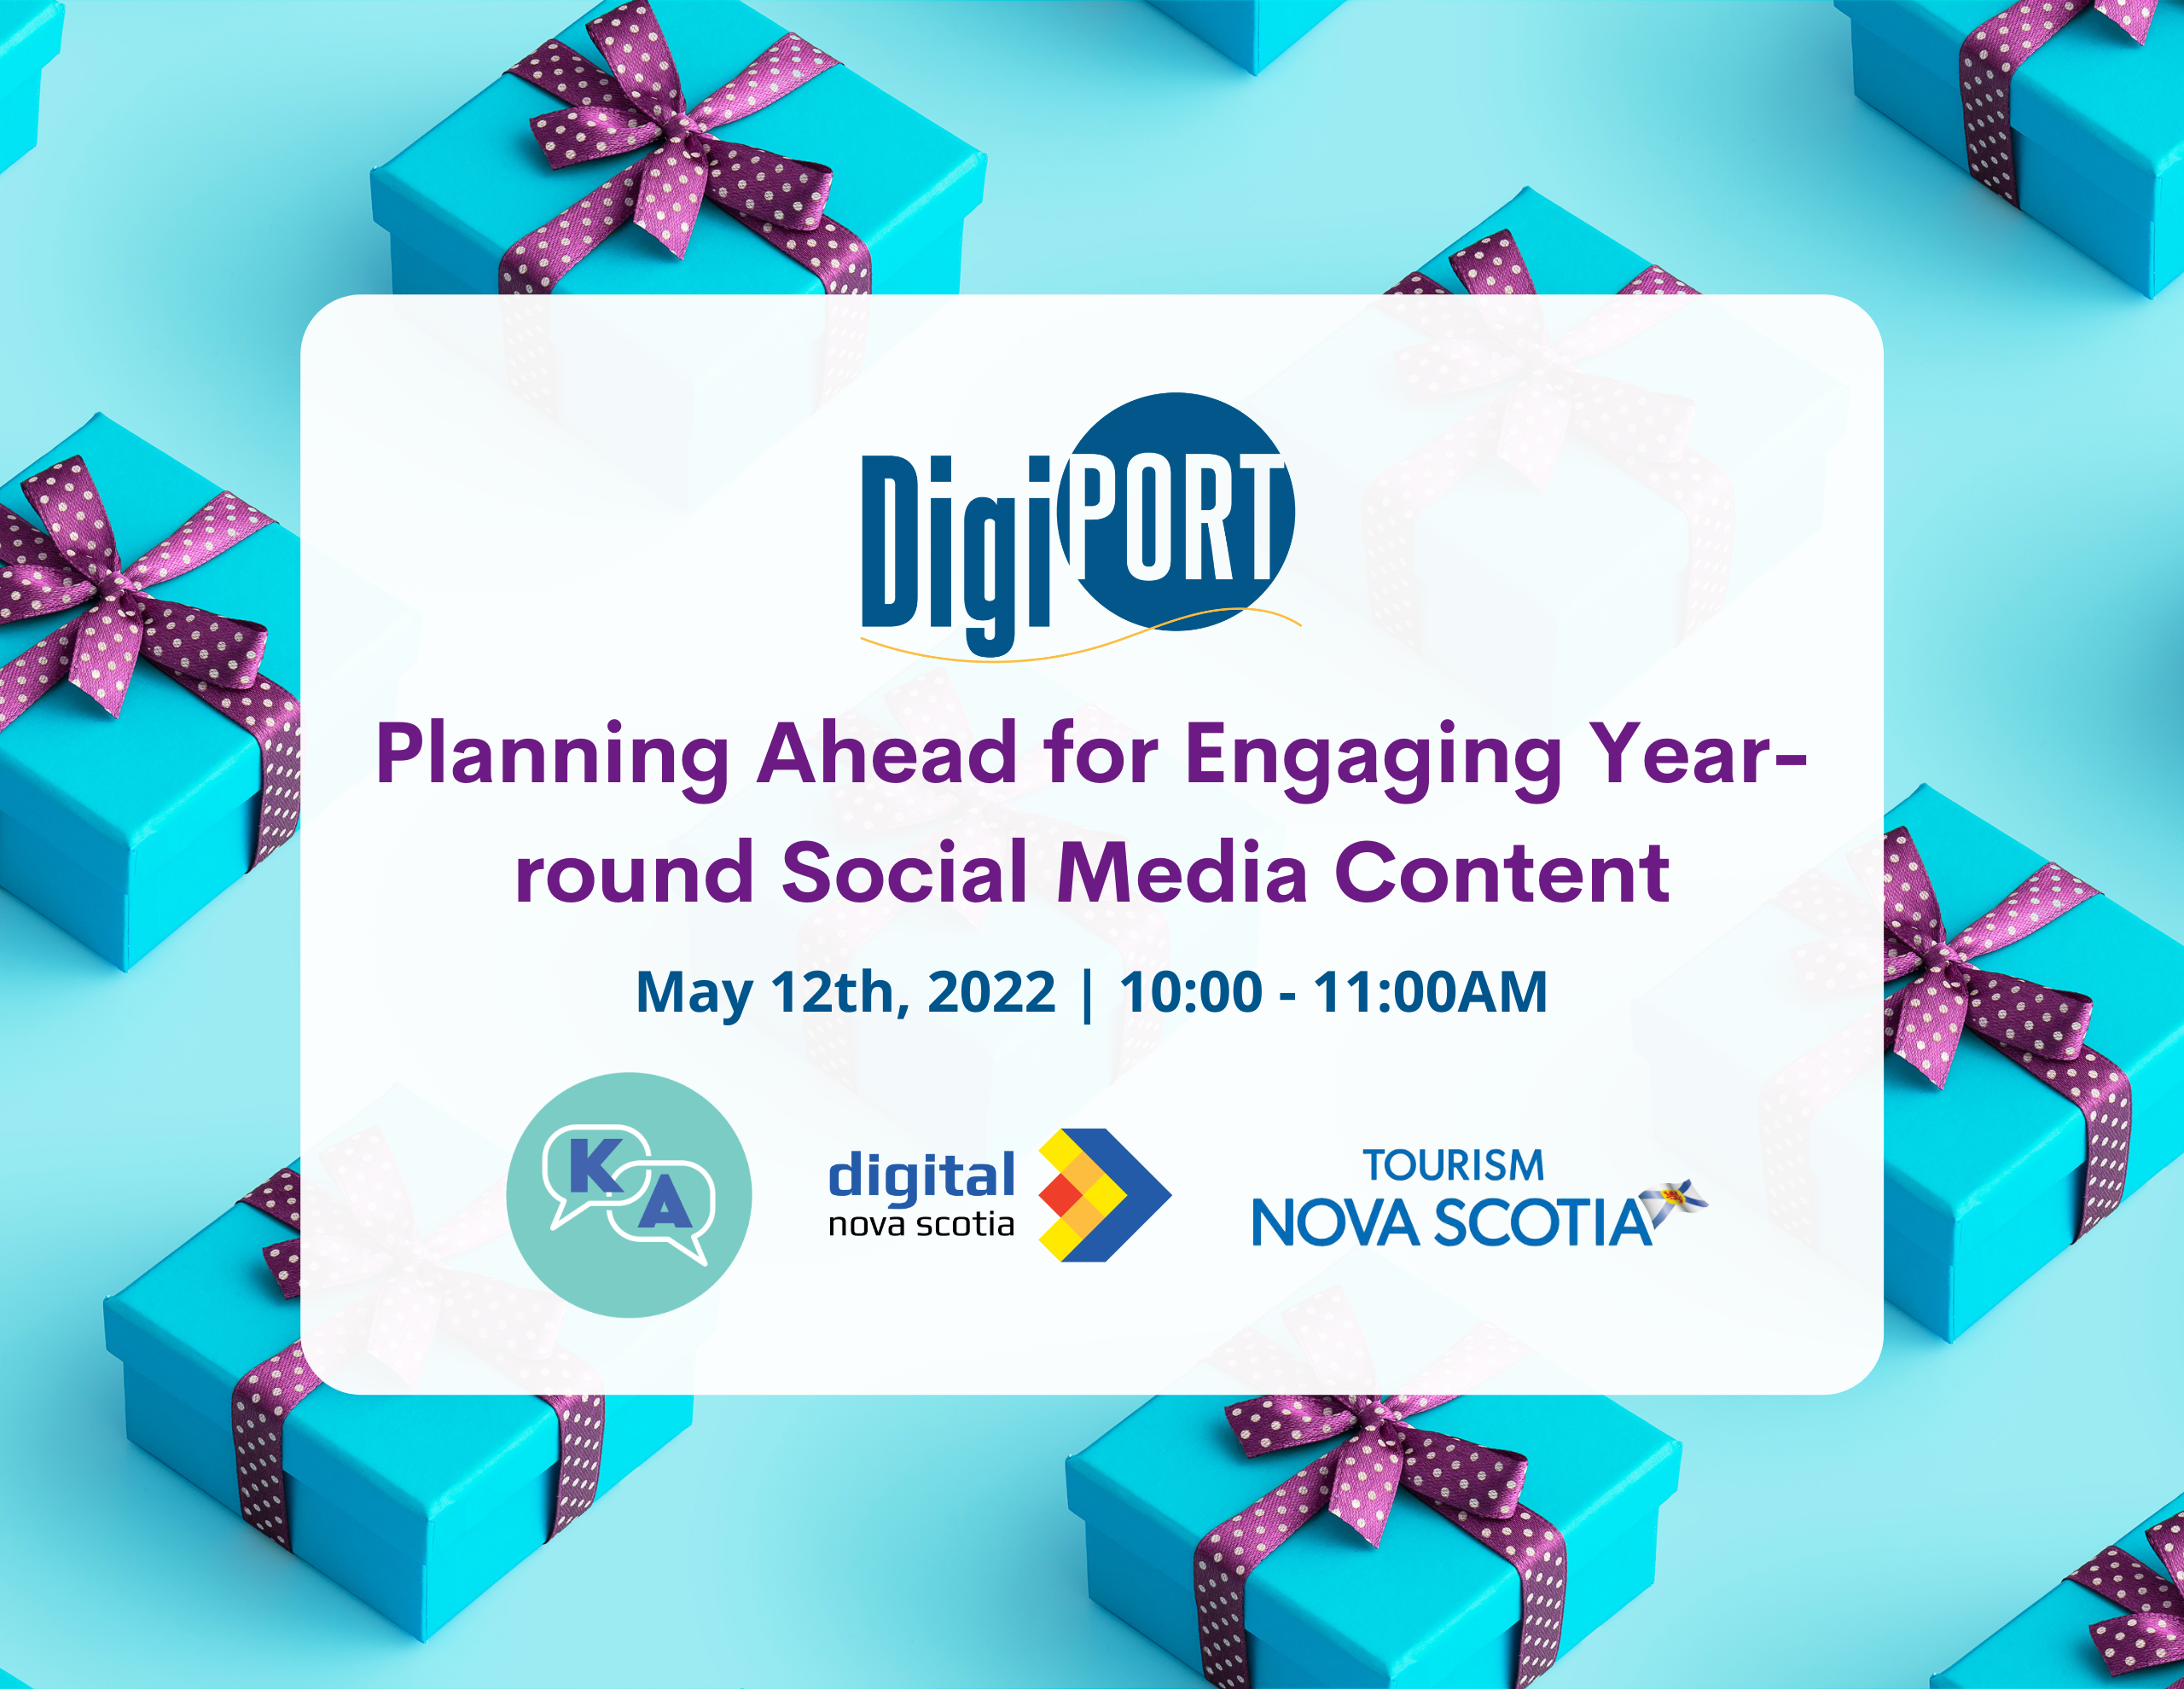 Planning Ahead for Engaging Year-round Social Media Content